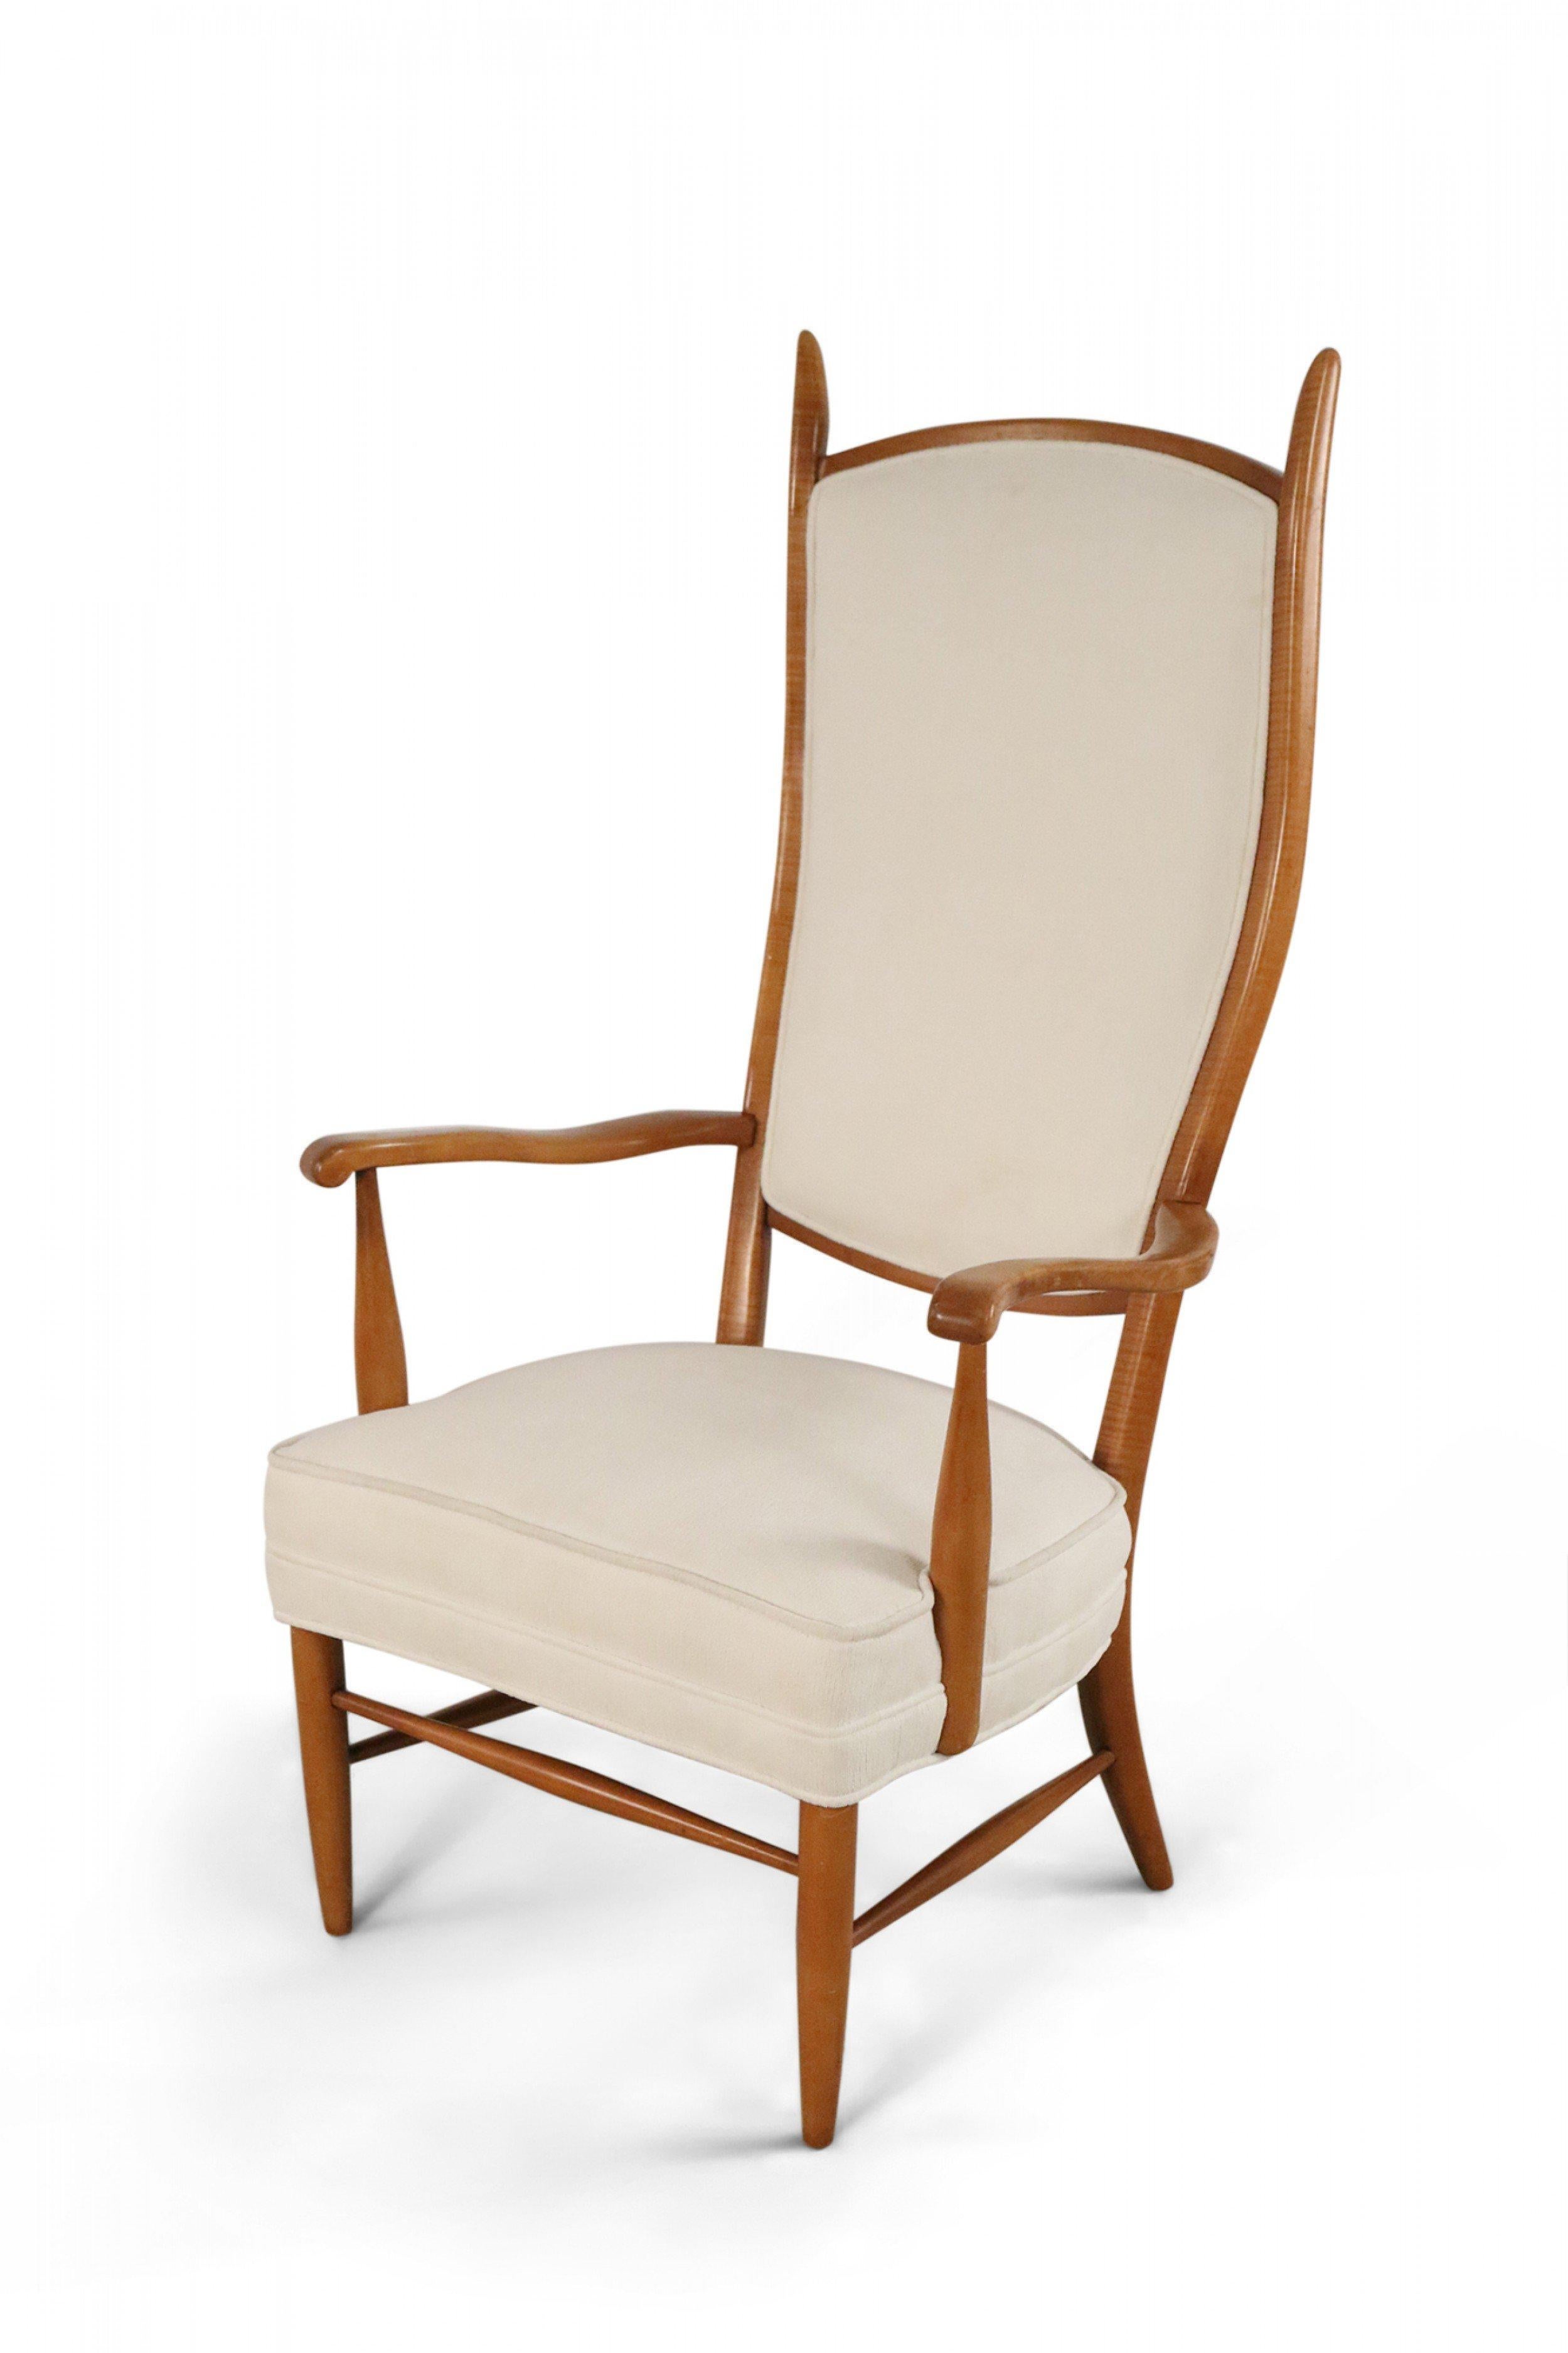 American Mid-Century Modern high back armchair with a maple frame and beige back and seat upholstery. (attributed to EDWARD WORMLEY)